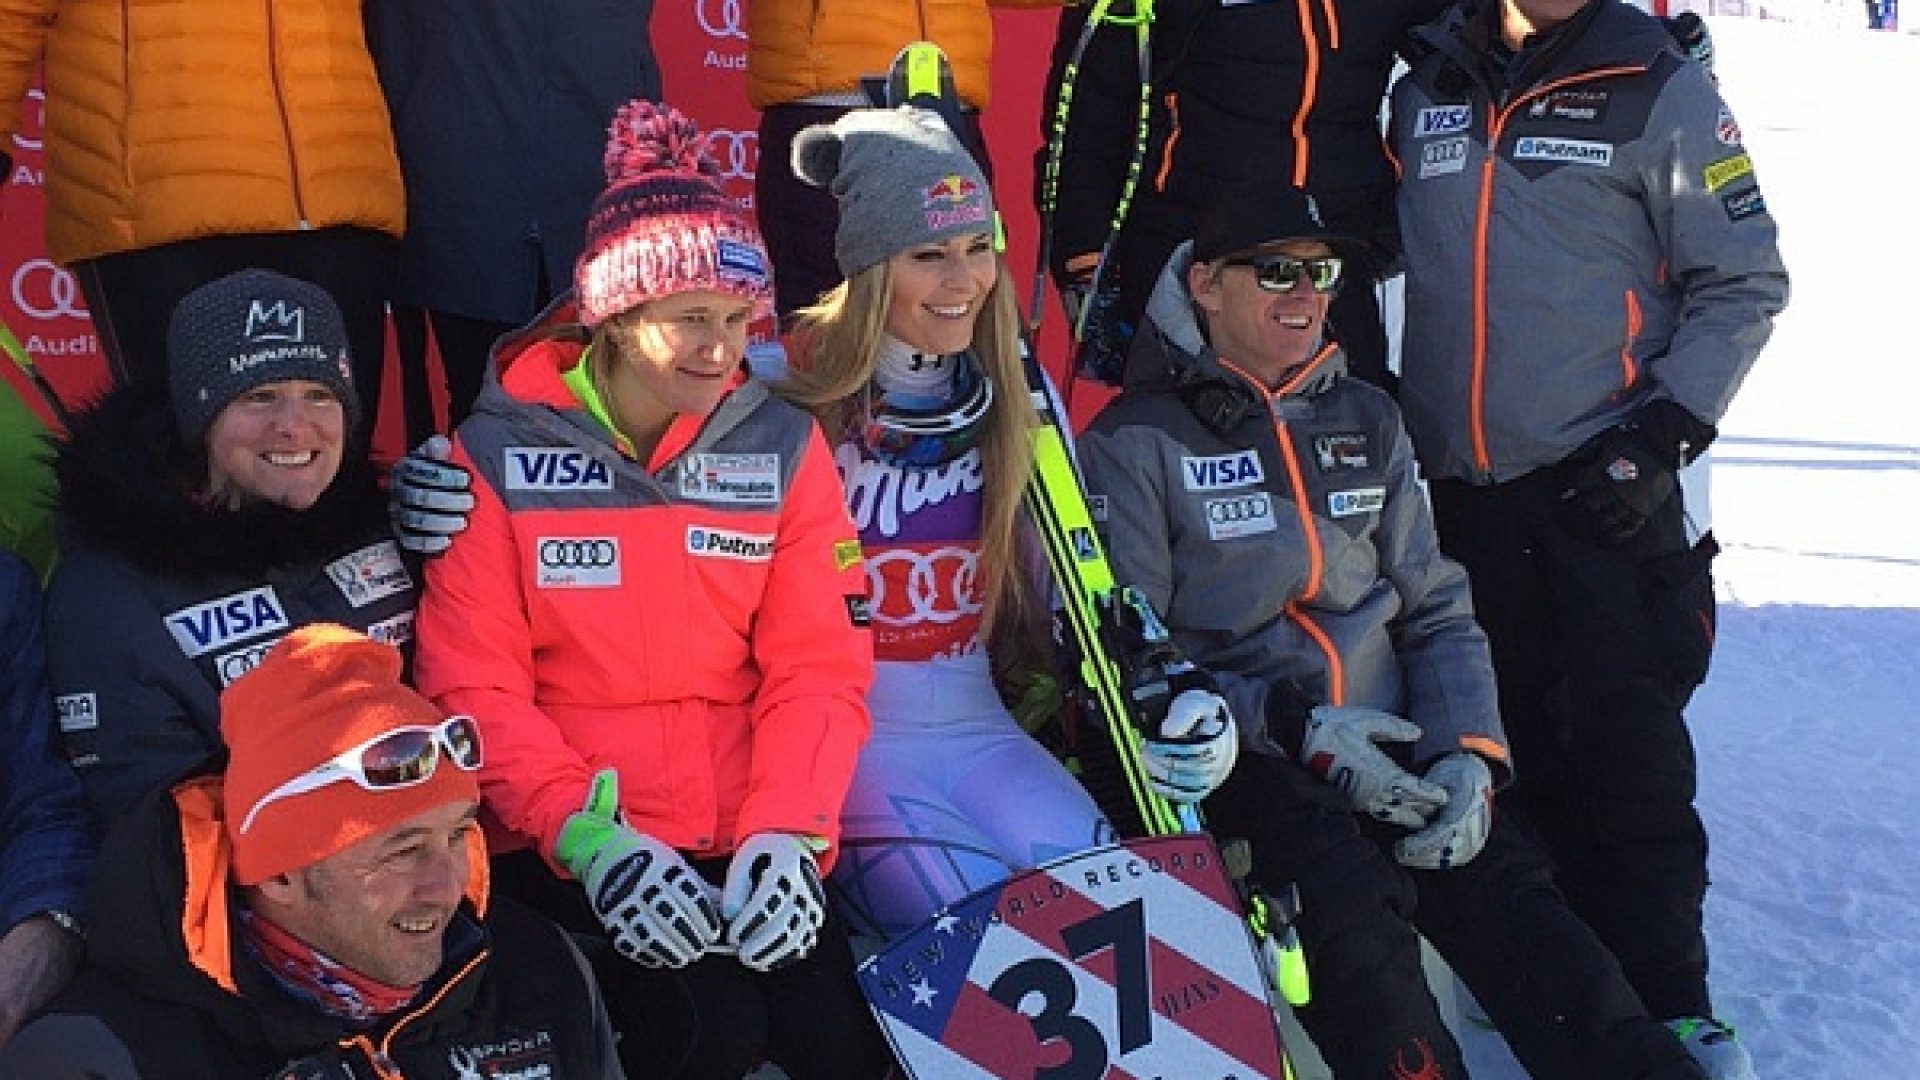 lindsey-and-the-us-ski-team-are-all-smiles-about-lindseys-historic-37th-dh-victory